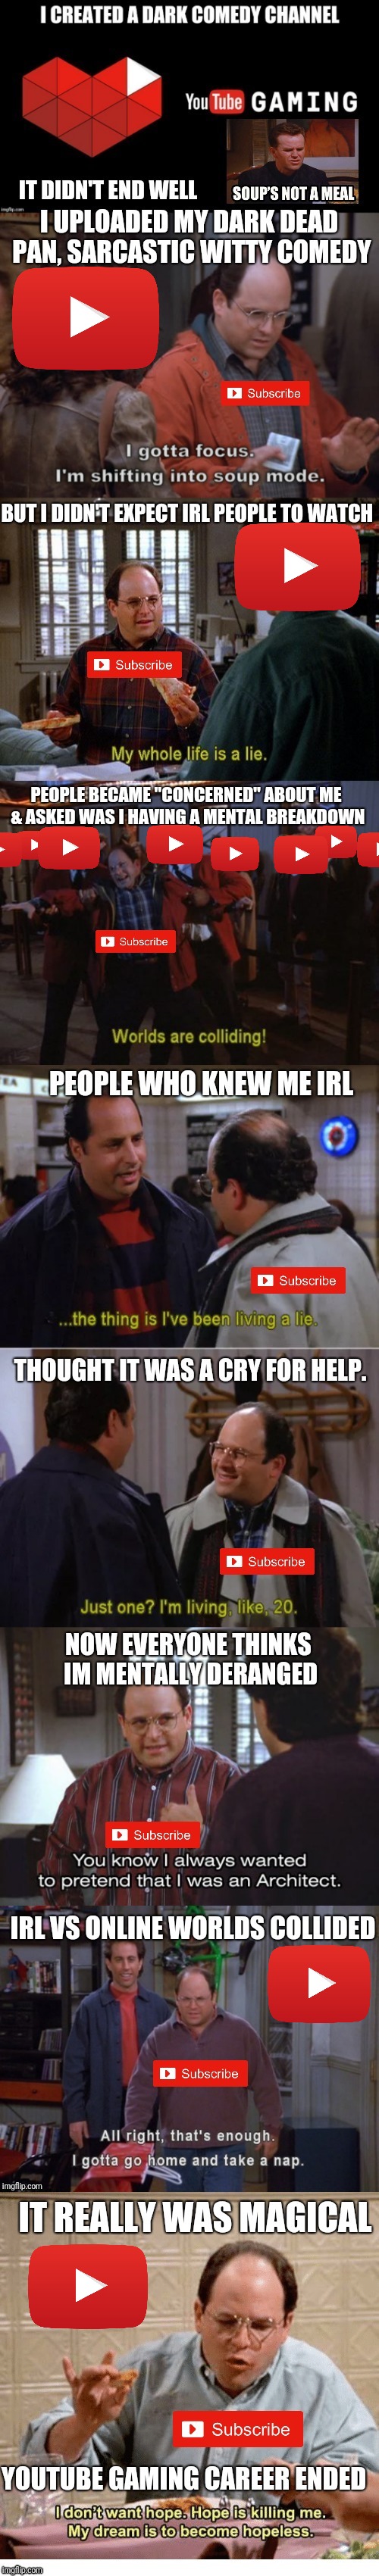 IRL vs Online Worlds collide | image tagged in seinfeld,george costanza,youtube,online gaming,irl vs online,dark humor | made w/ Imgflip meme maker